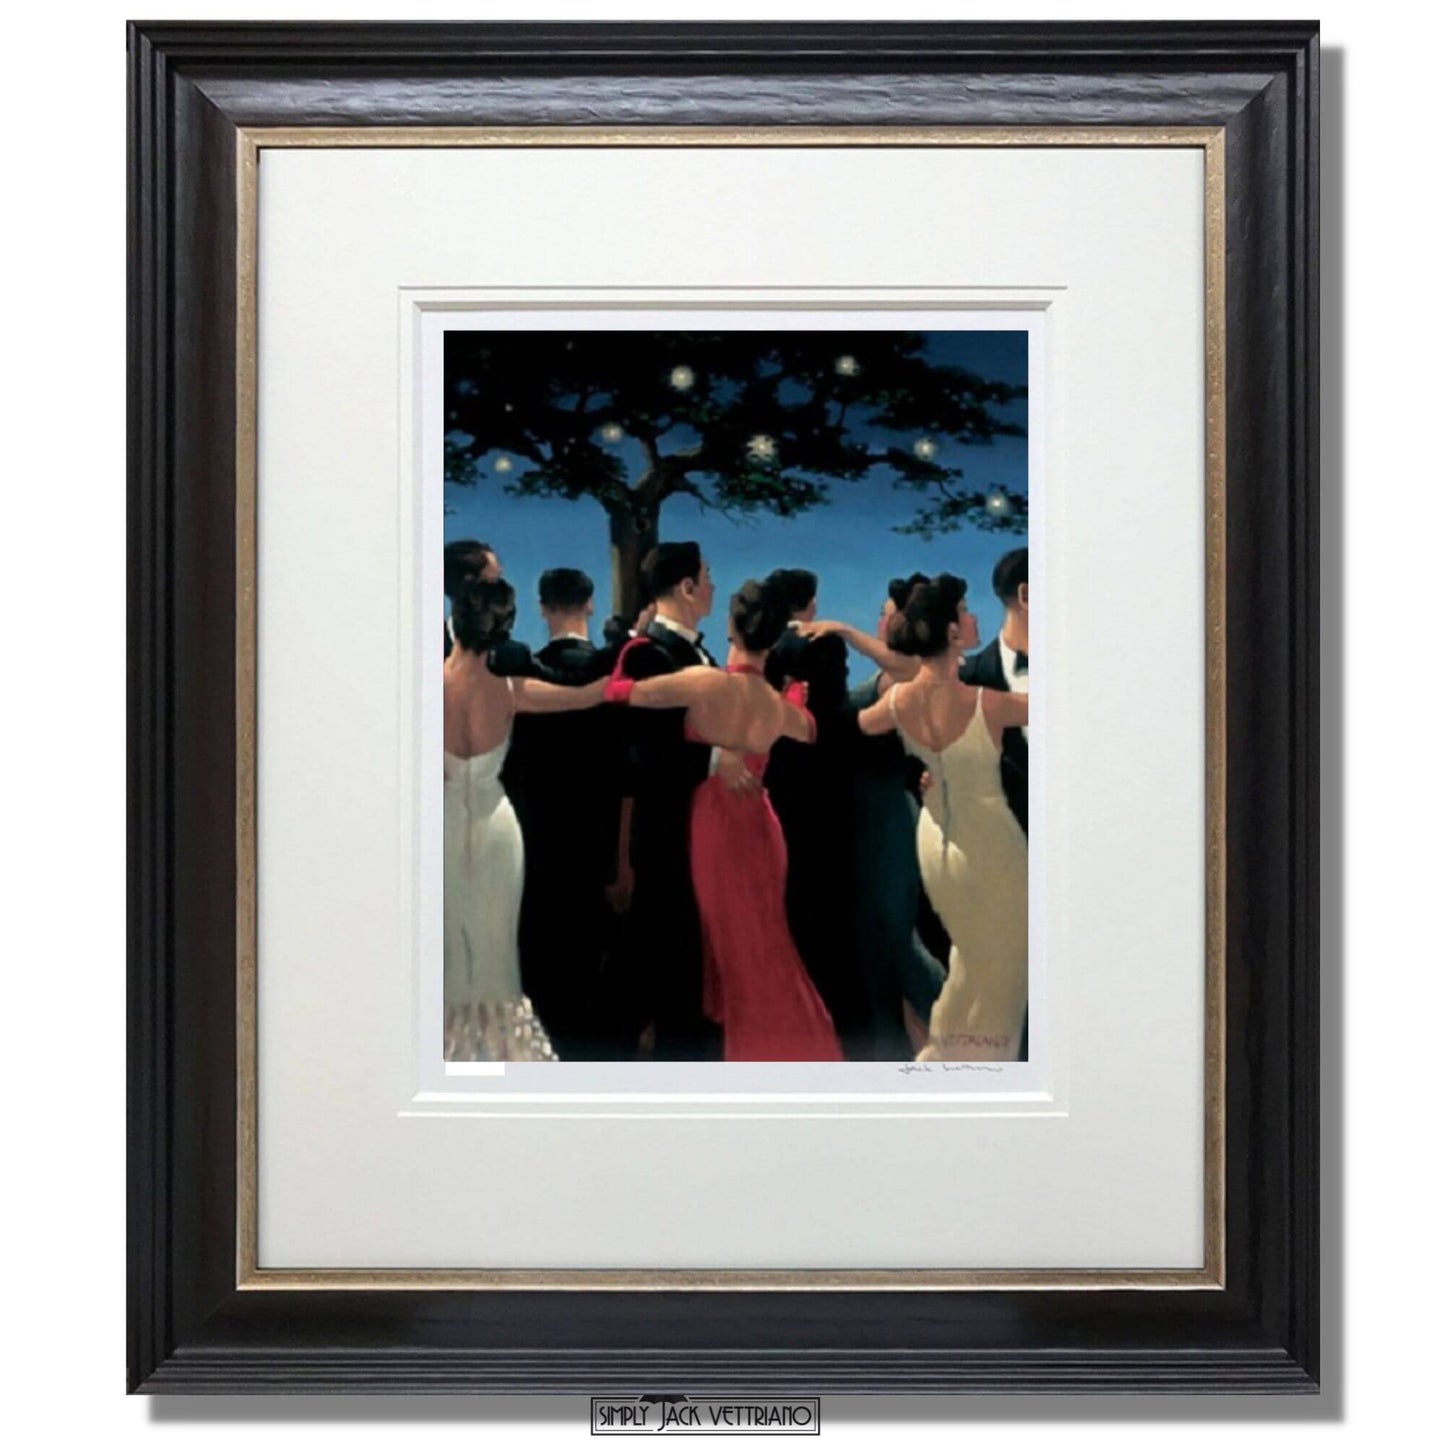 Waltzers by Jack Vettriano Limited Edition Framed